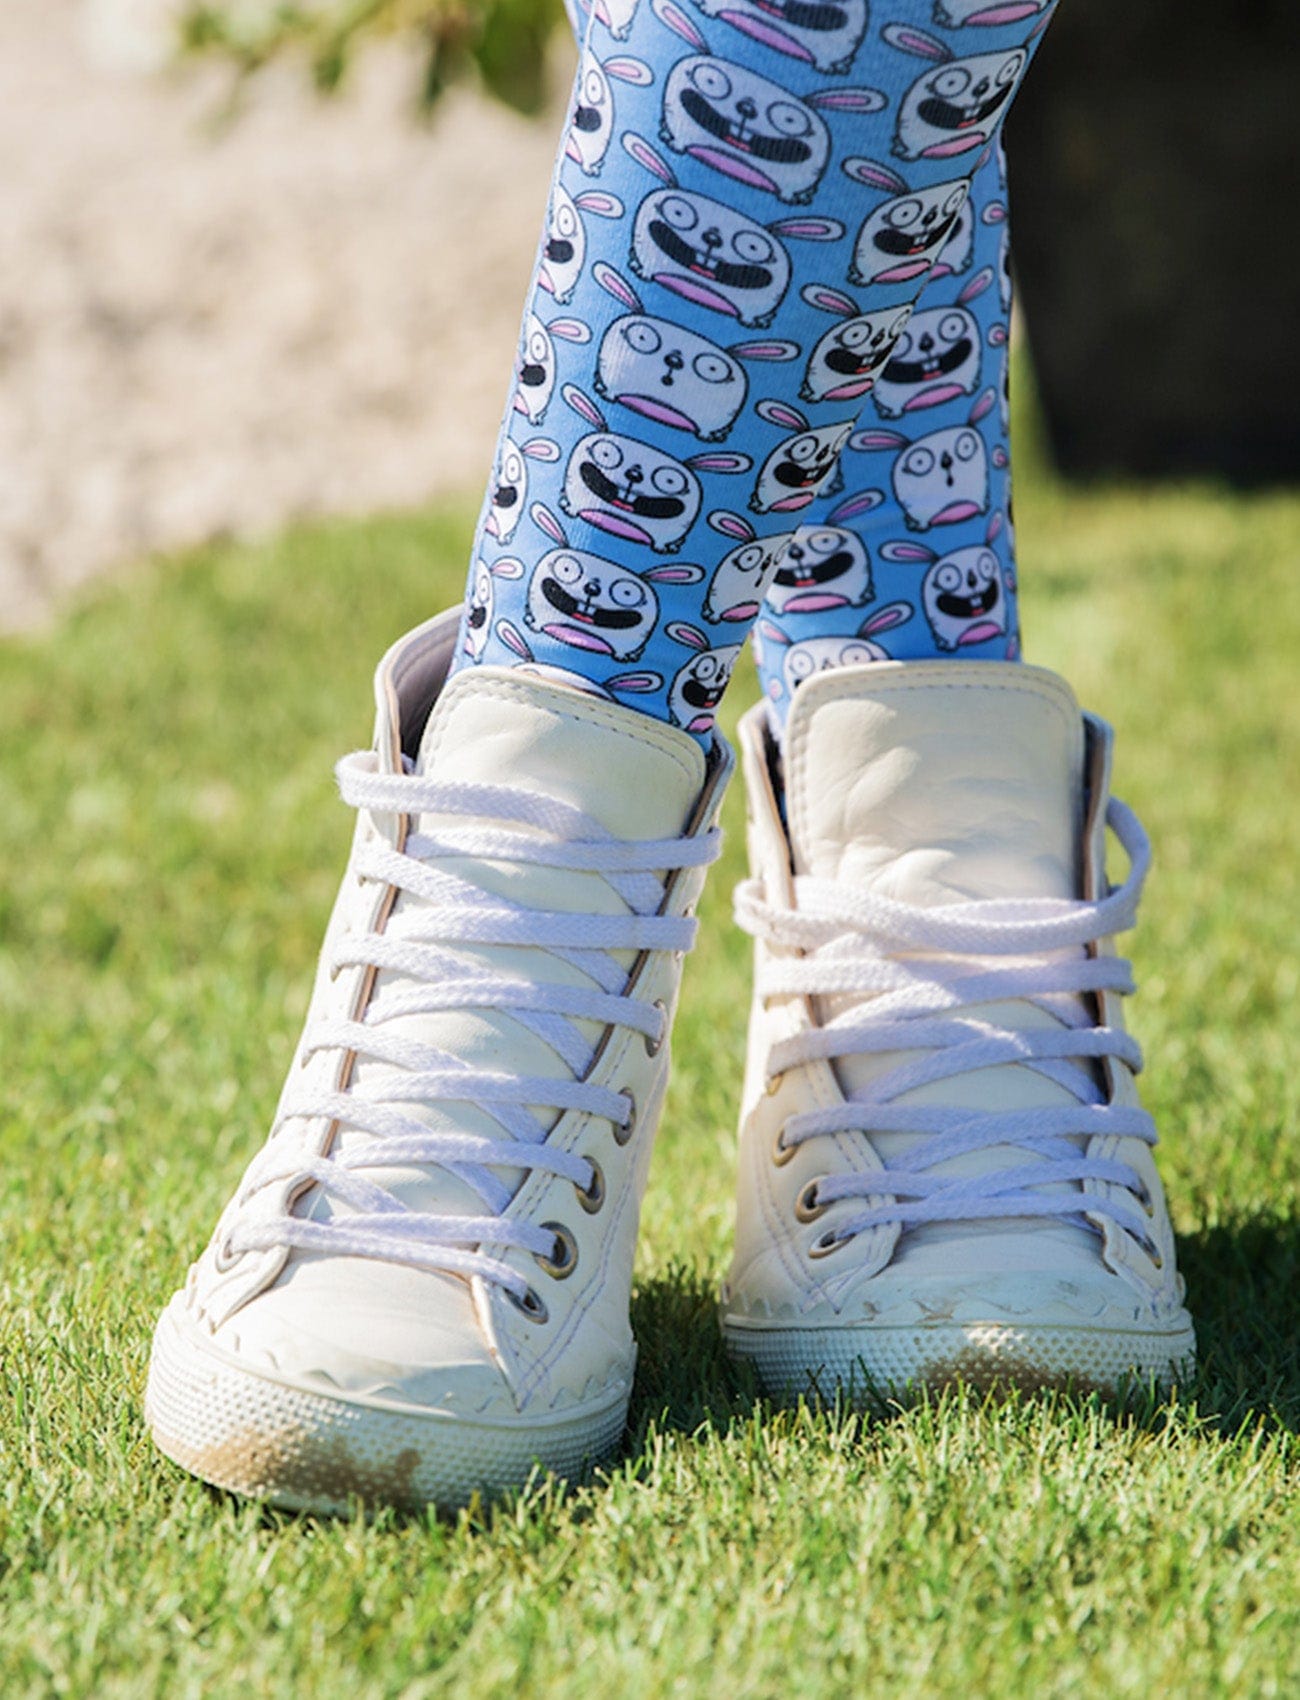 dreamers & schemers Pair & A Spare Hare Raising Pair & a Spare equestrian boot socks boot socks thin socks riding socks pattern socks tall socks funny socks knee high socks horse socks horse show socks